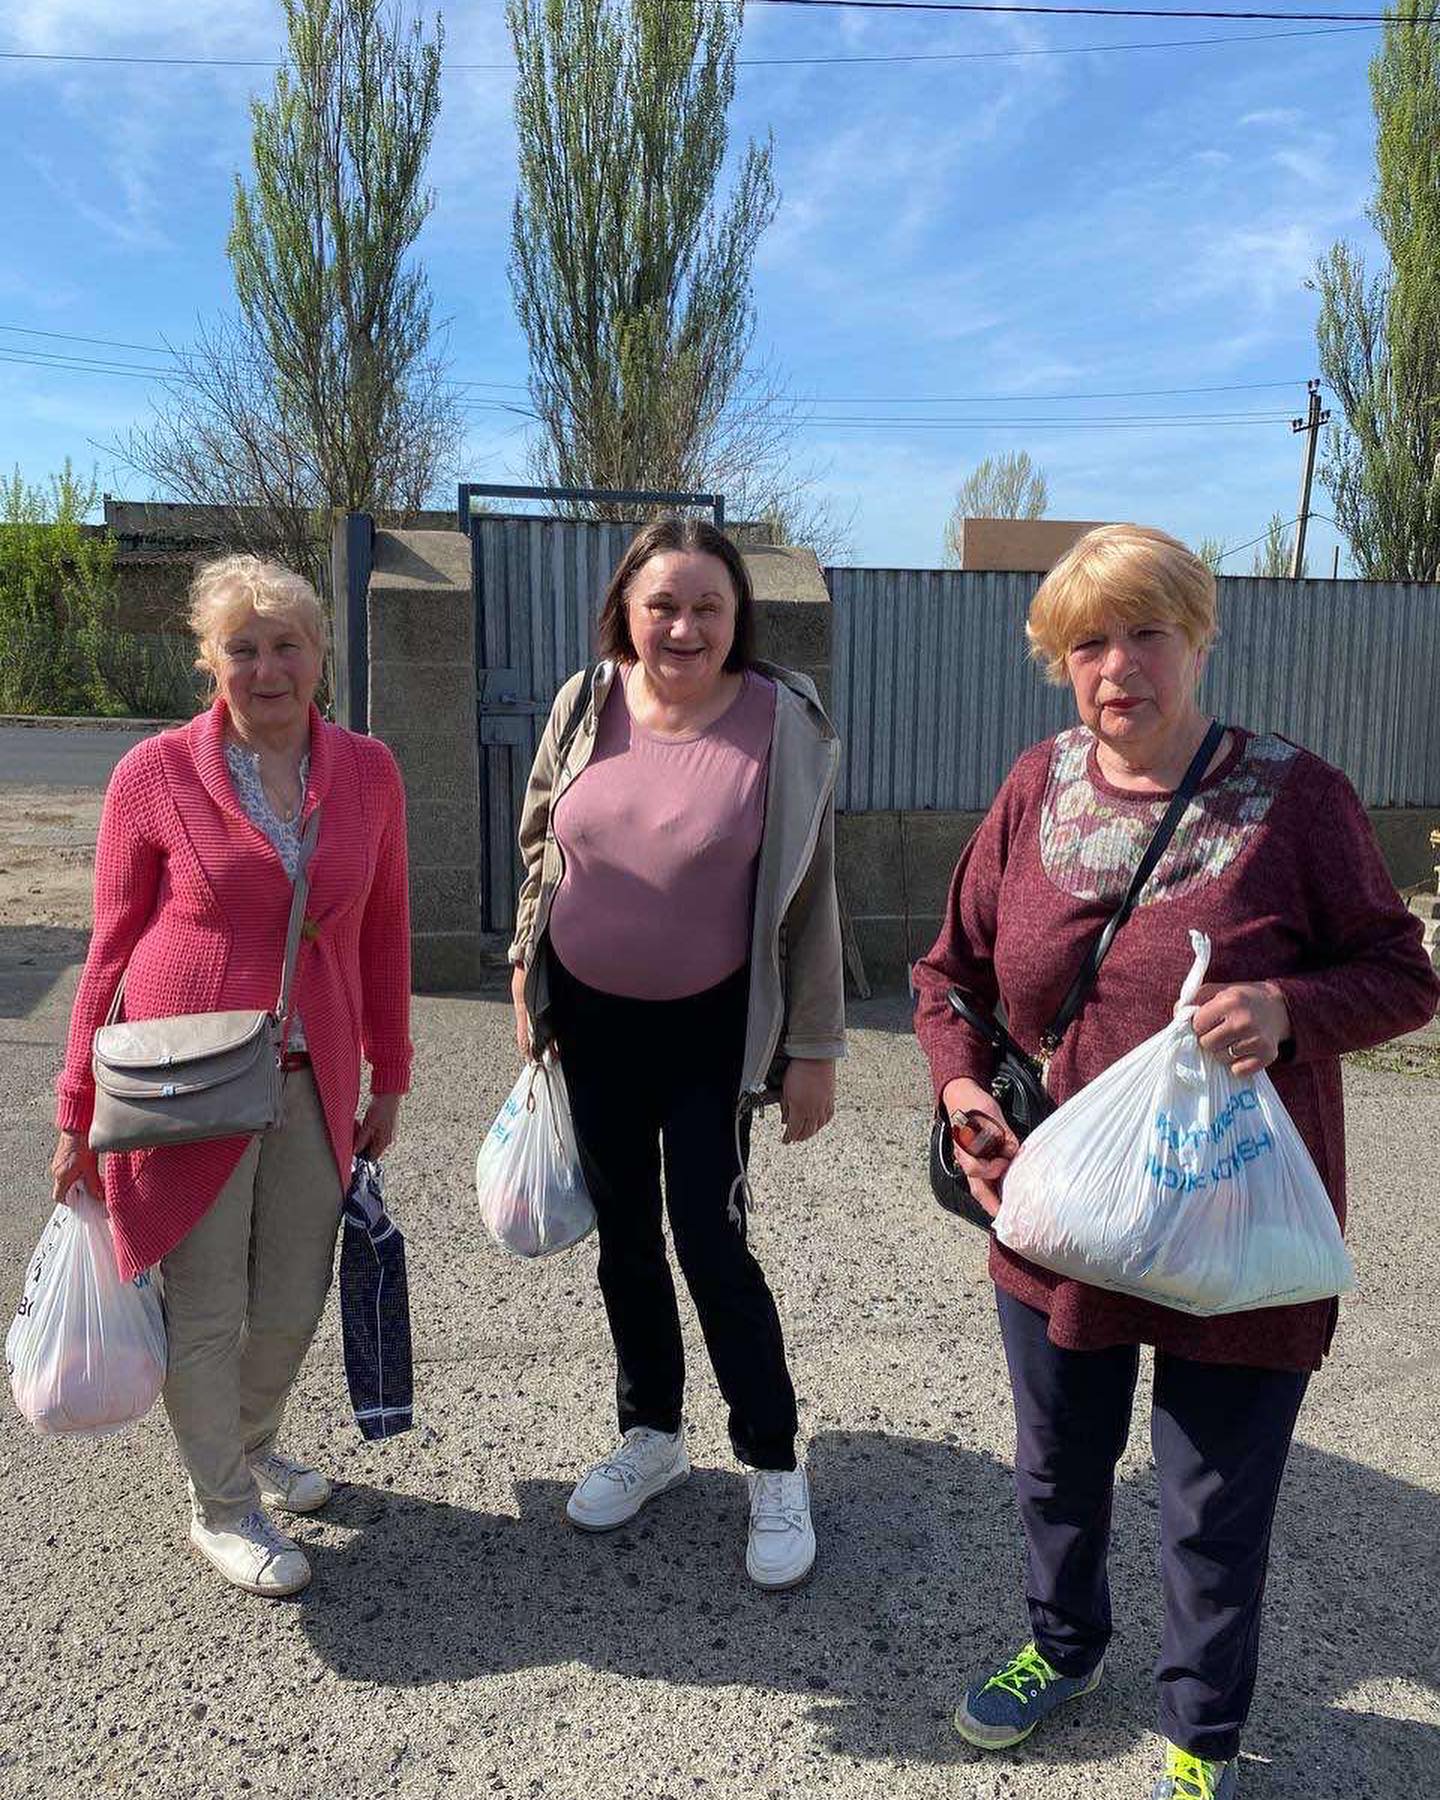 Three women standing outside, smiling, each holding shopping bags. Two elderly, one middle-aged, in casual attire on a sunny day. They volunteer to help Ukraine.